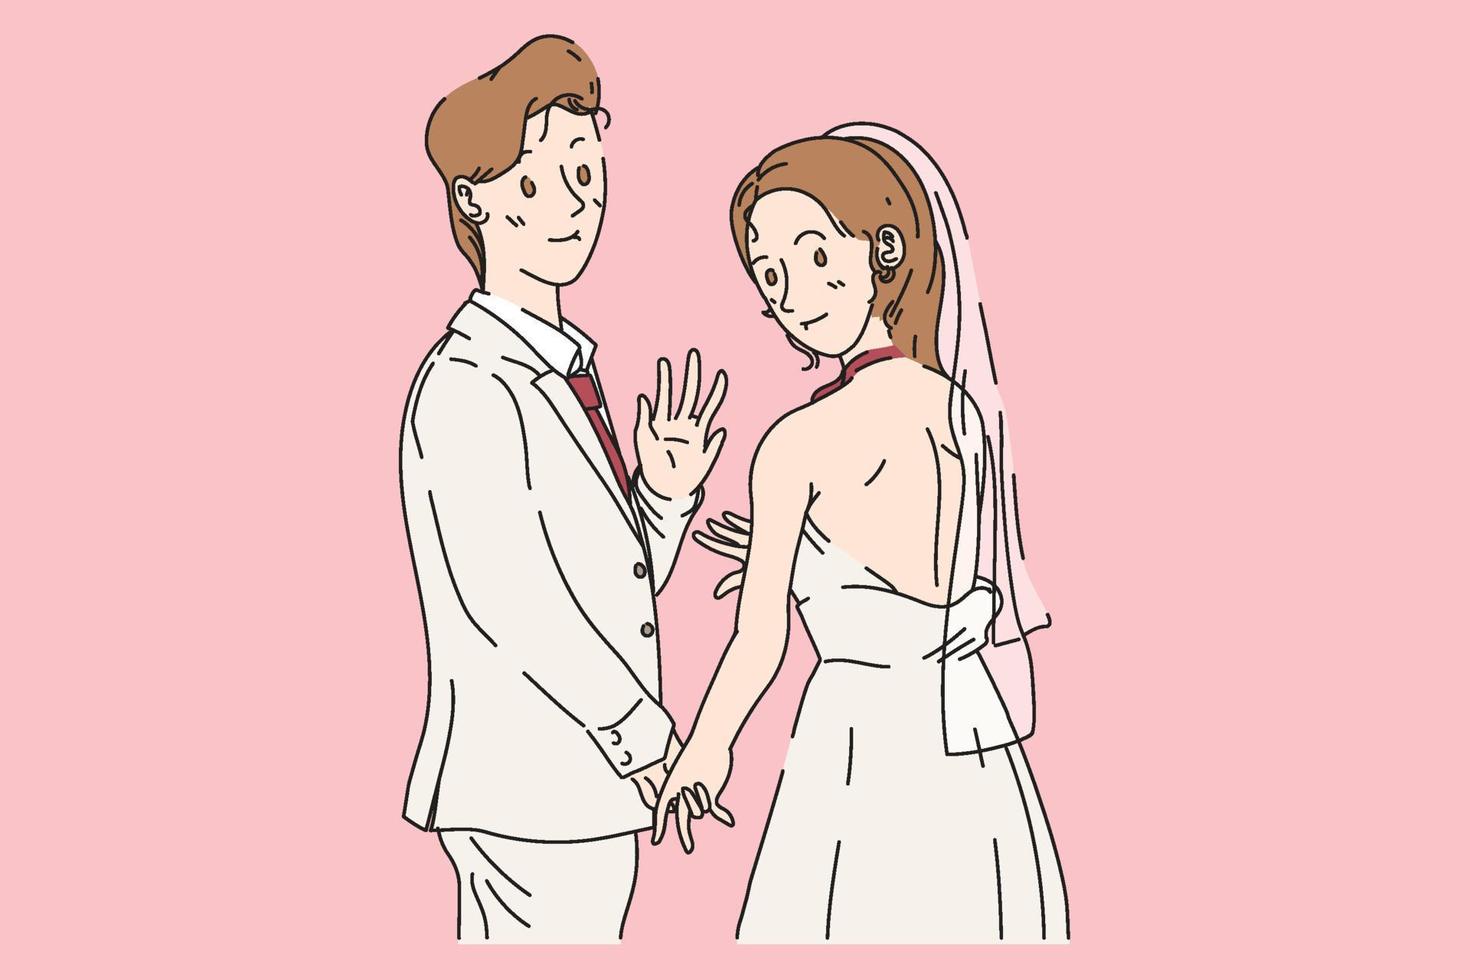 Wedding cartoon graphic, couple married hand drawn graphic vector illustration on soft tone color